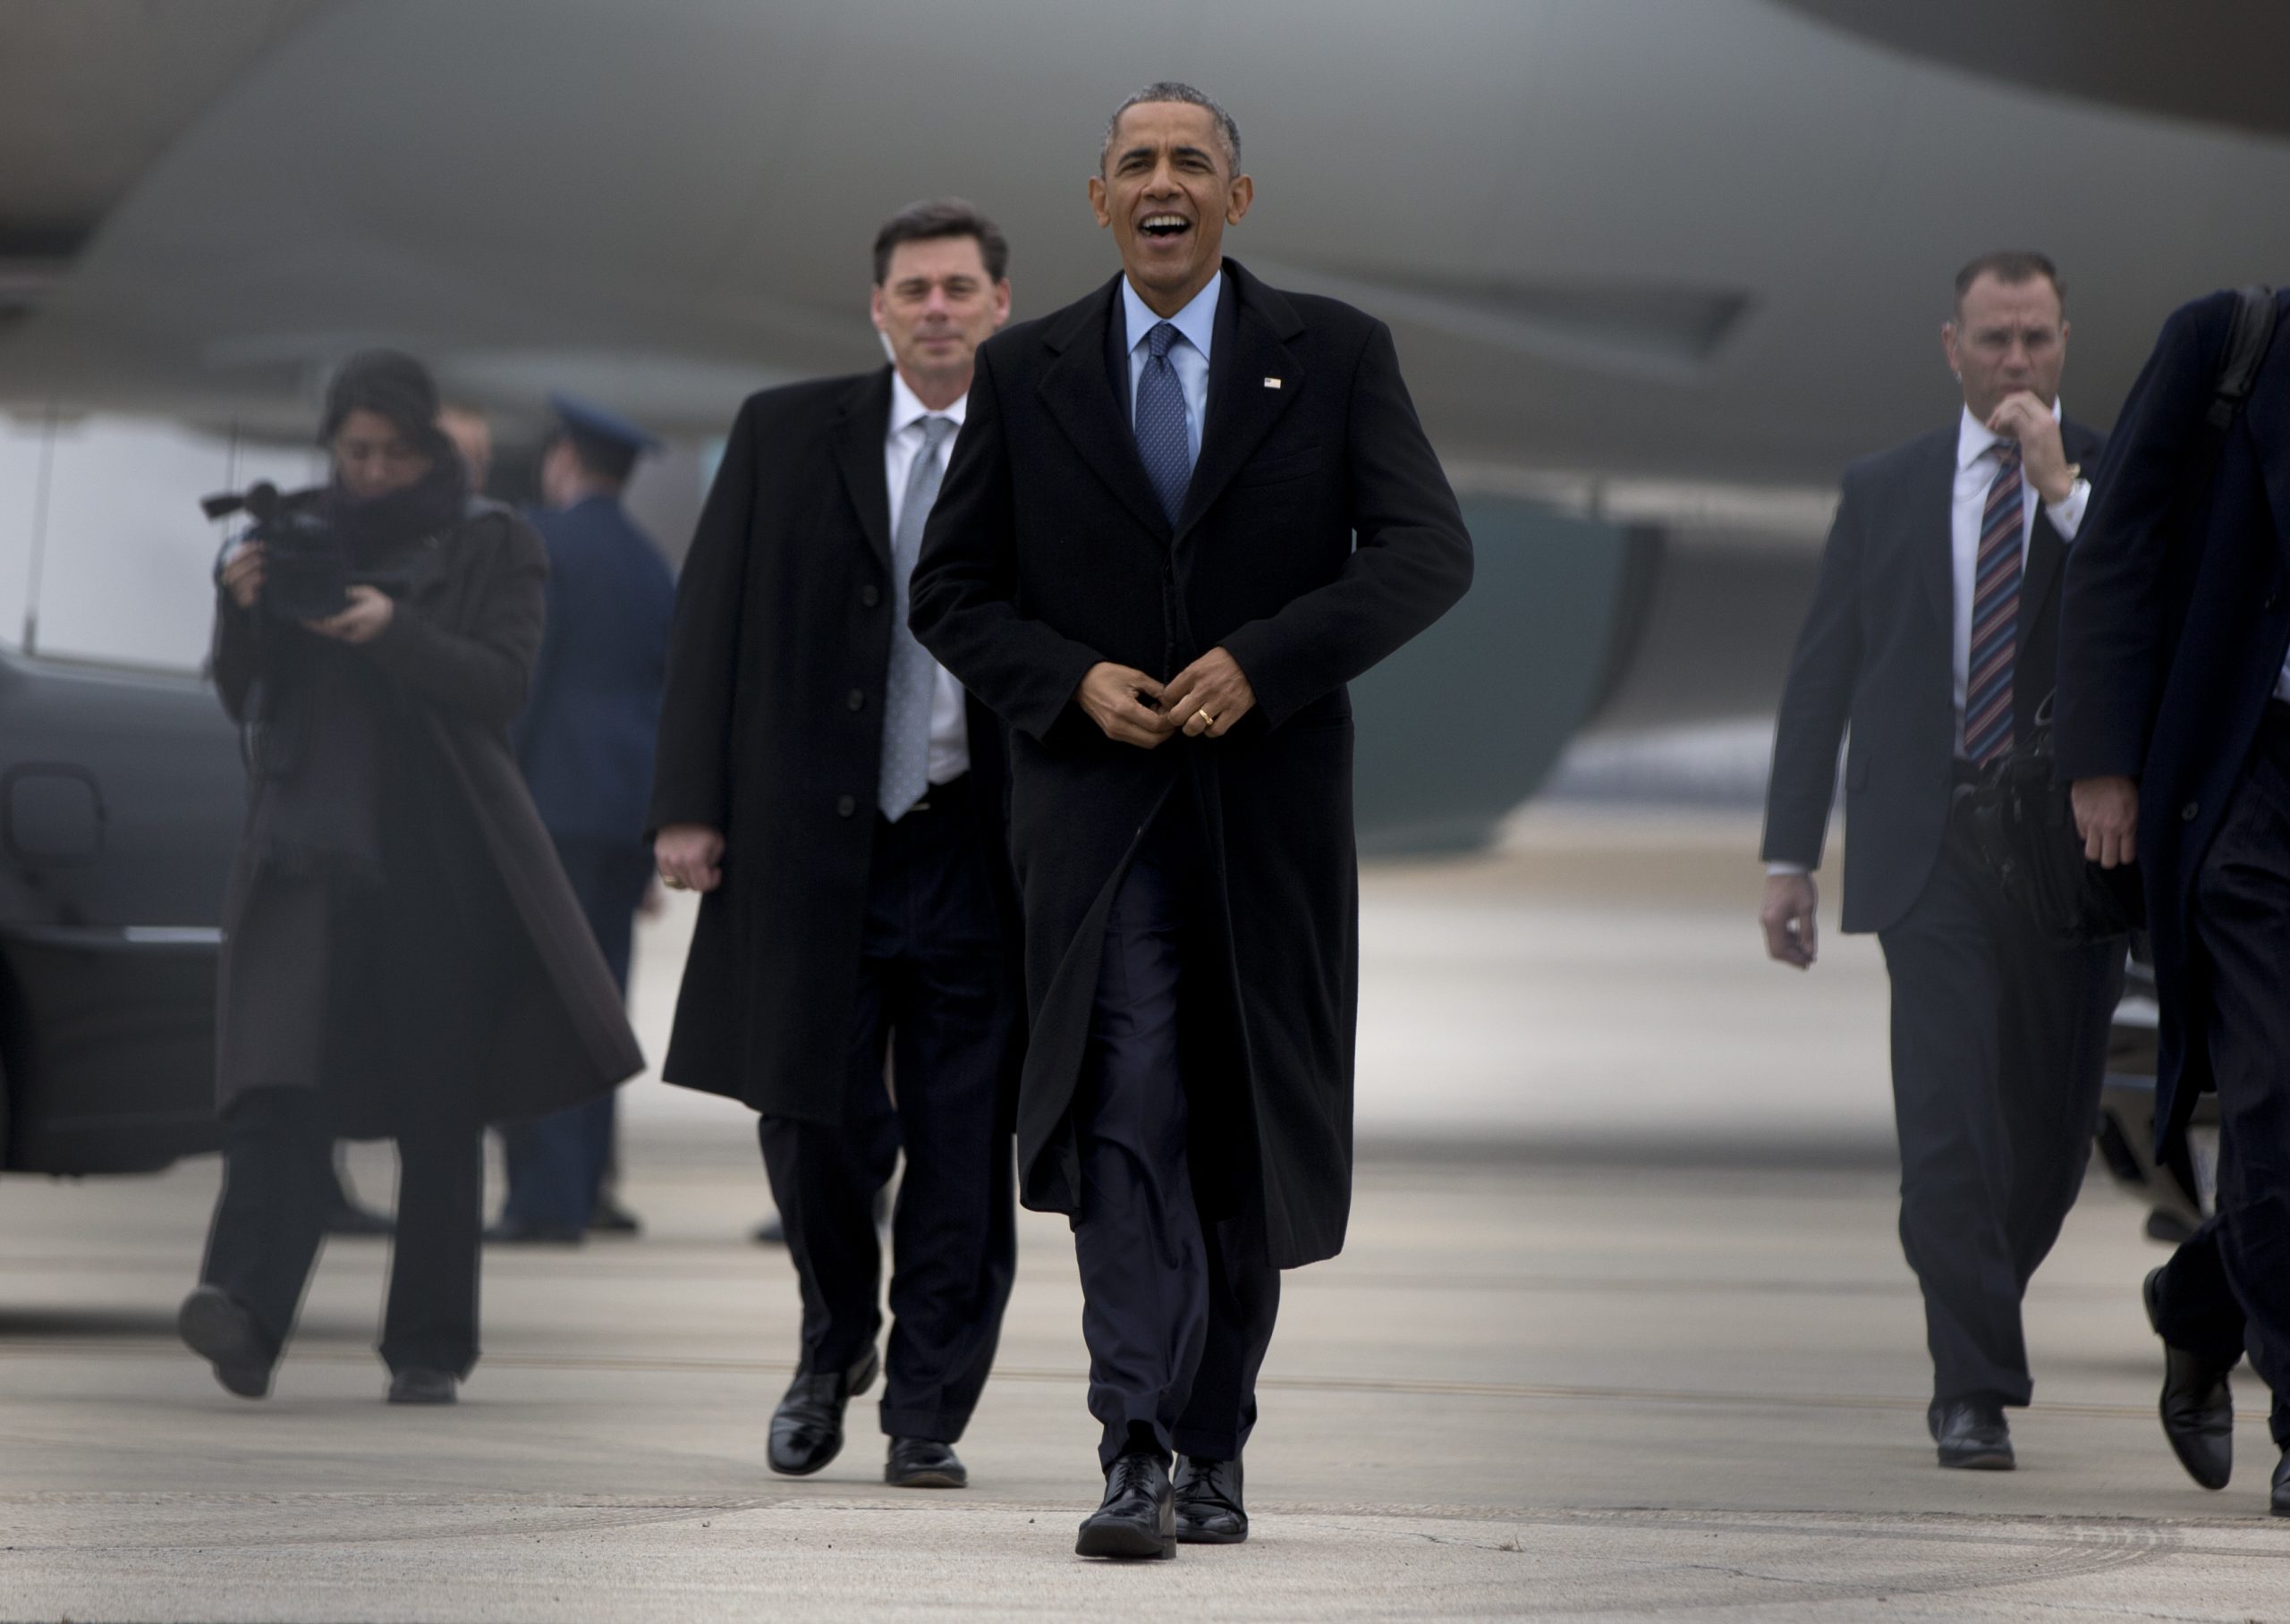 President Barack Obama walks to greets people on the tarmac before boarding Air Force One at Forbes Field Airport, Thursday, Jan. 22, 2015, in Topeka, Kansas, en route to Washington, after speaking at the University of Kansas in Lawrence, Kan., about the themes in his State of the Union address. (AP Photo/Carolyn Kaster)